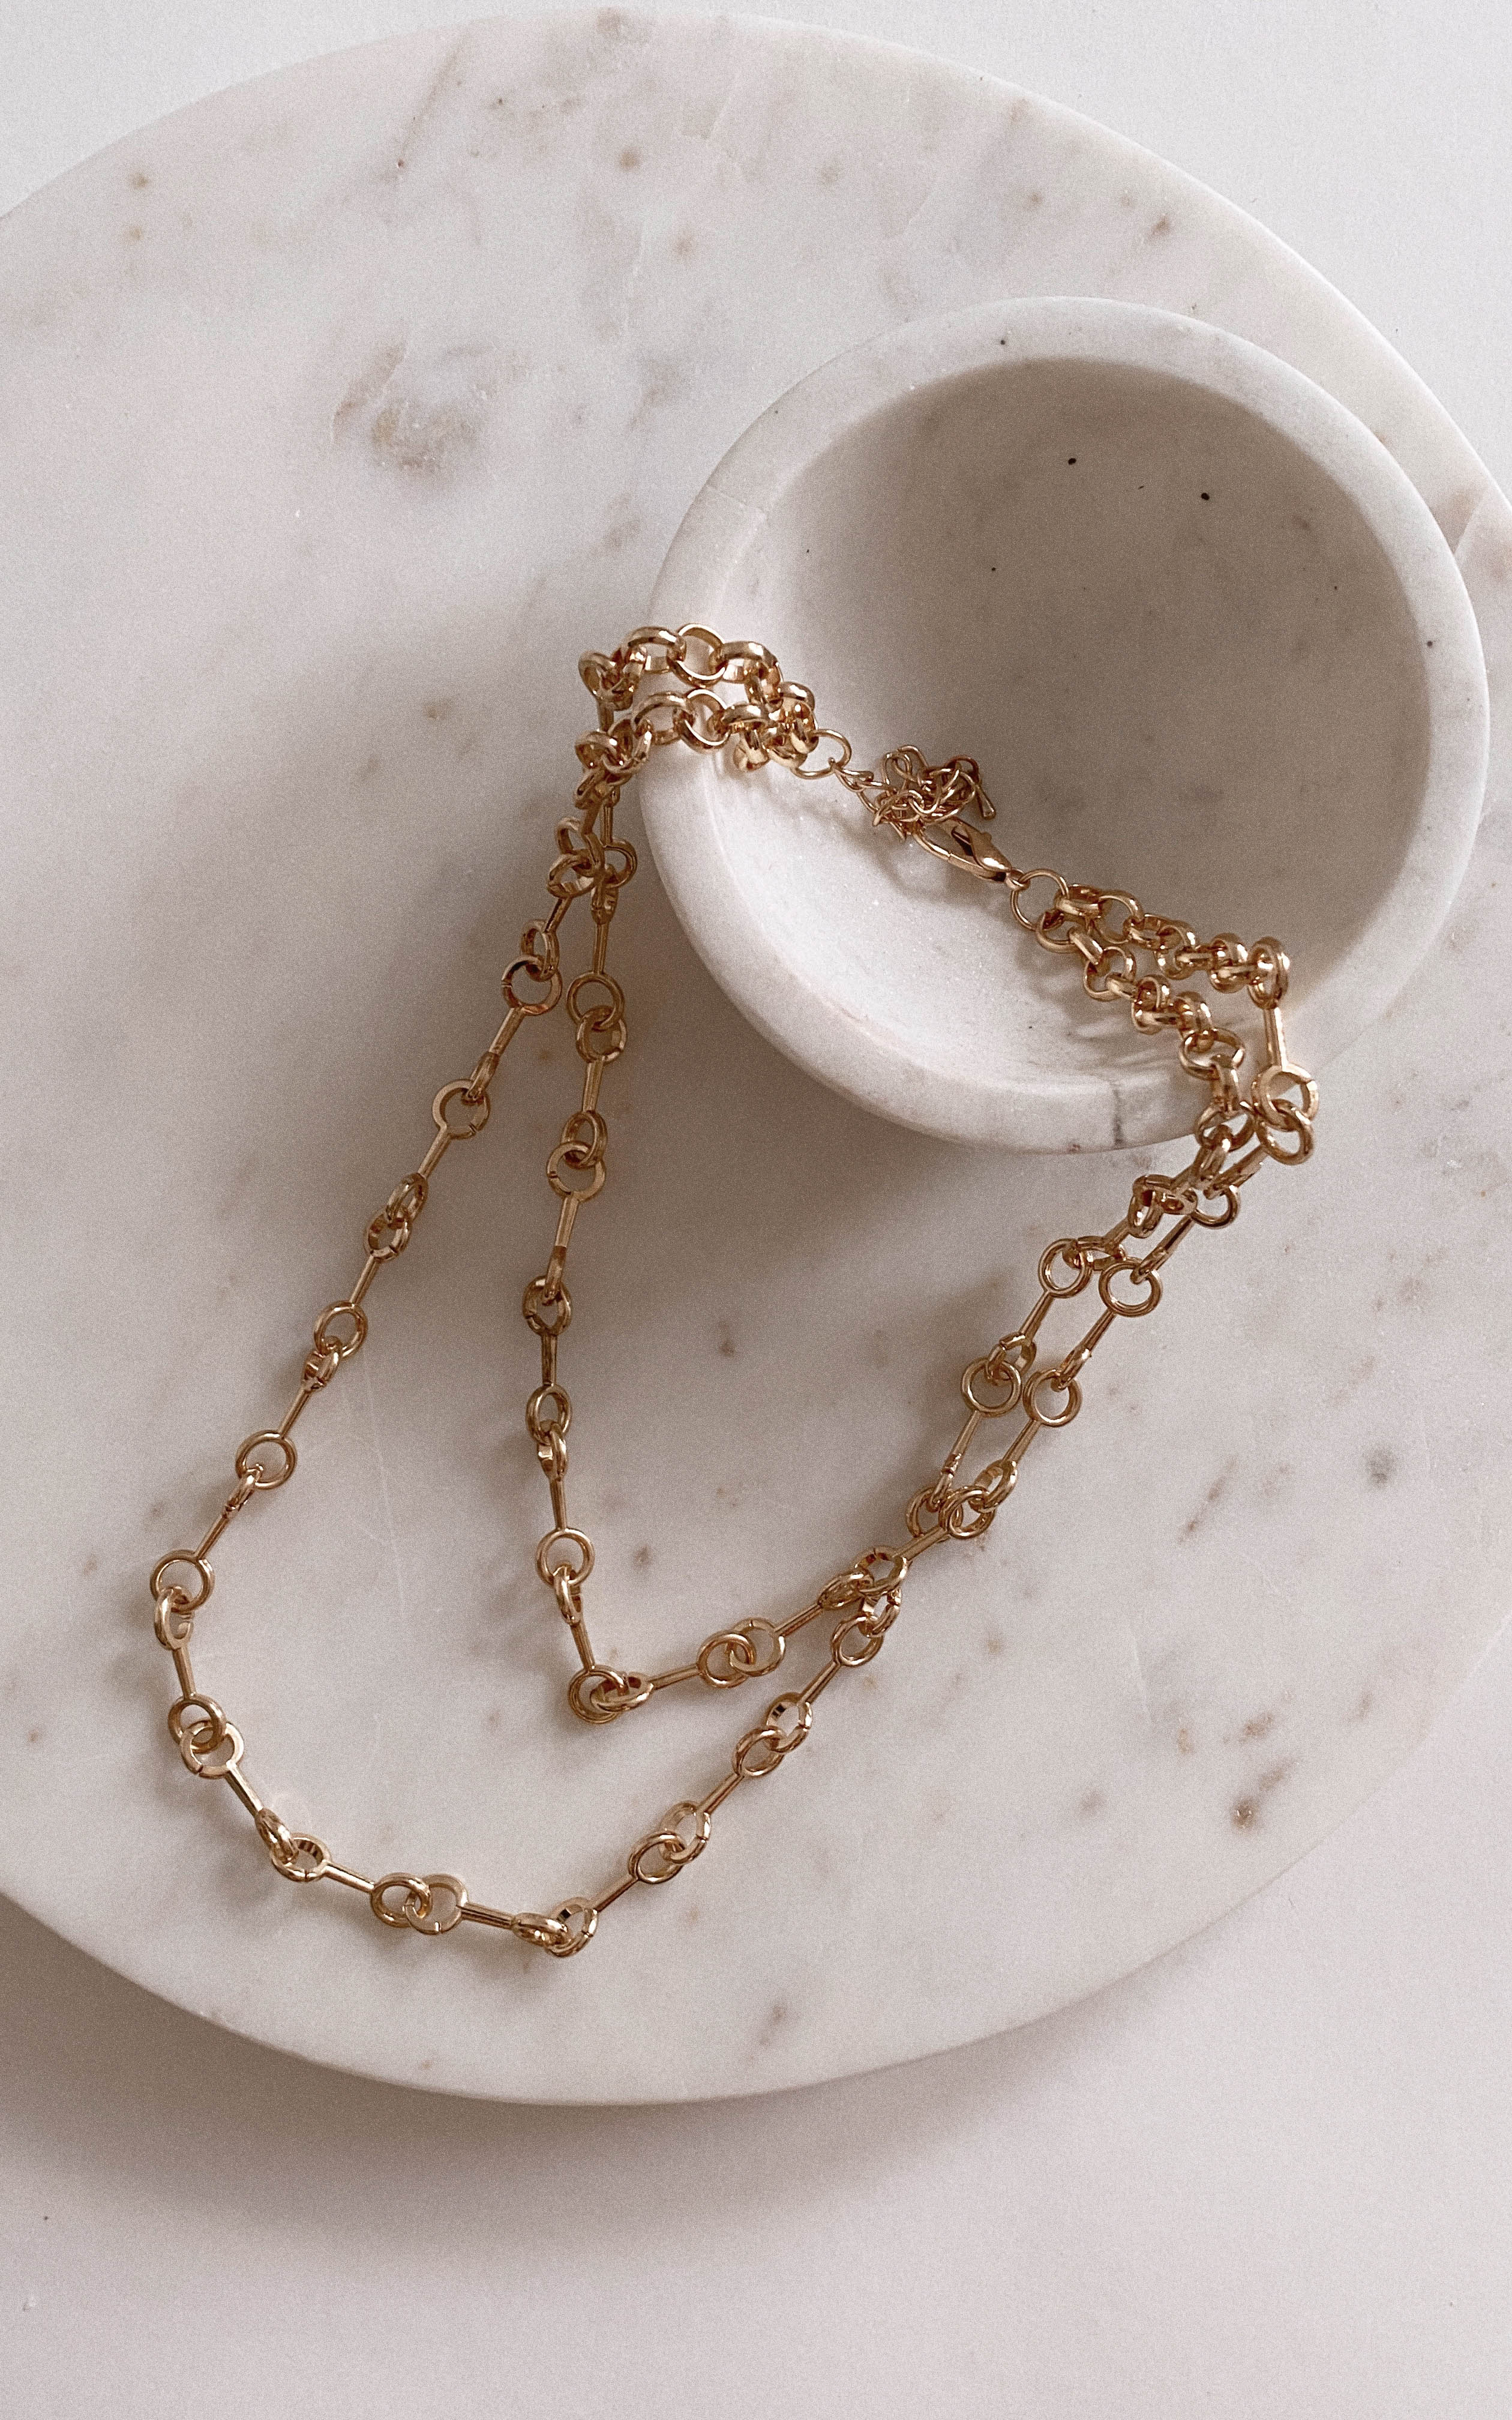 Jean Chain Necklace - House of Tinks